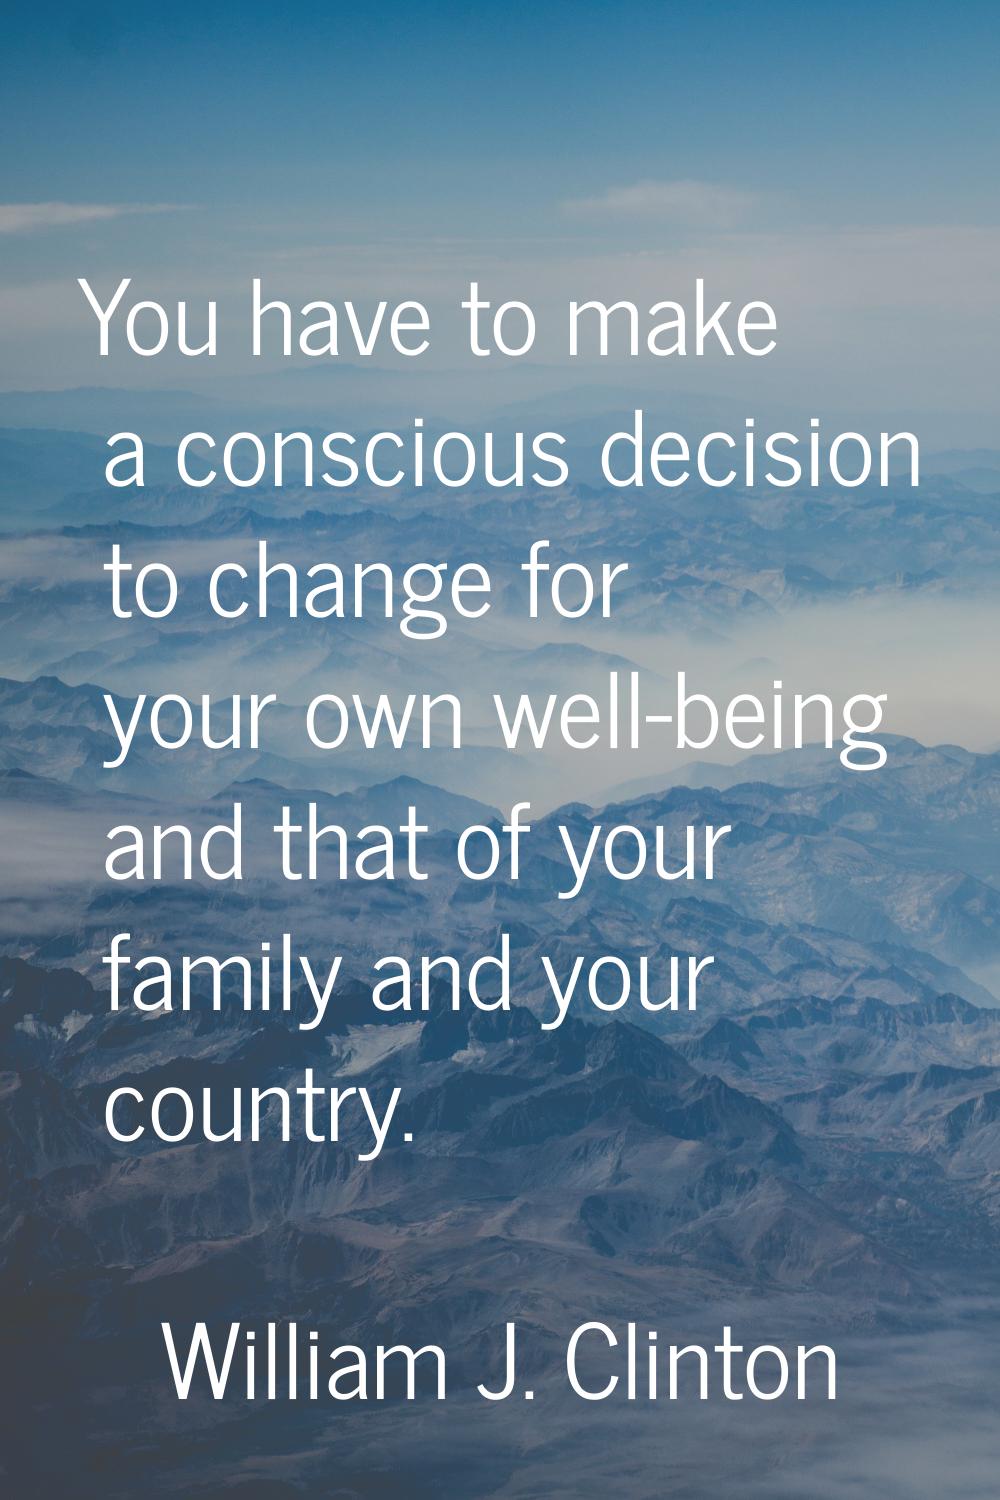 You have to make a conscious decision to change for your own well-being and that of your family and